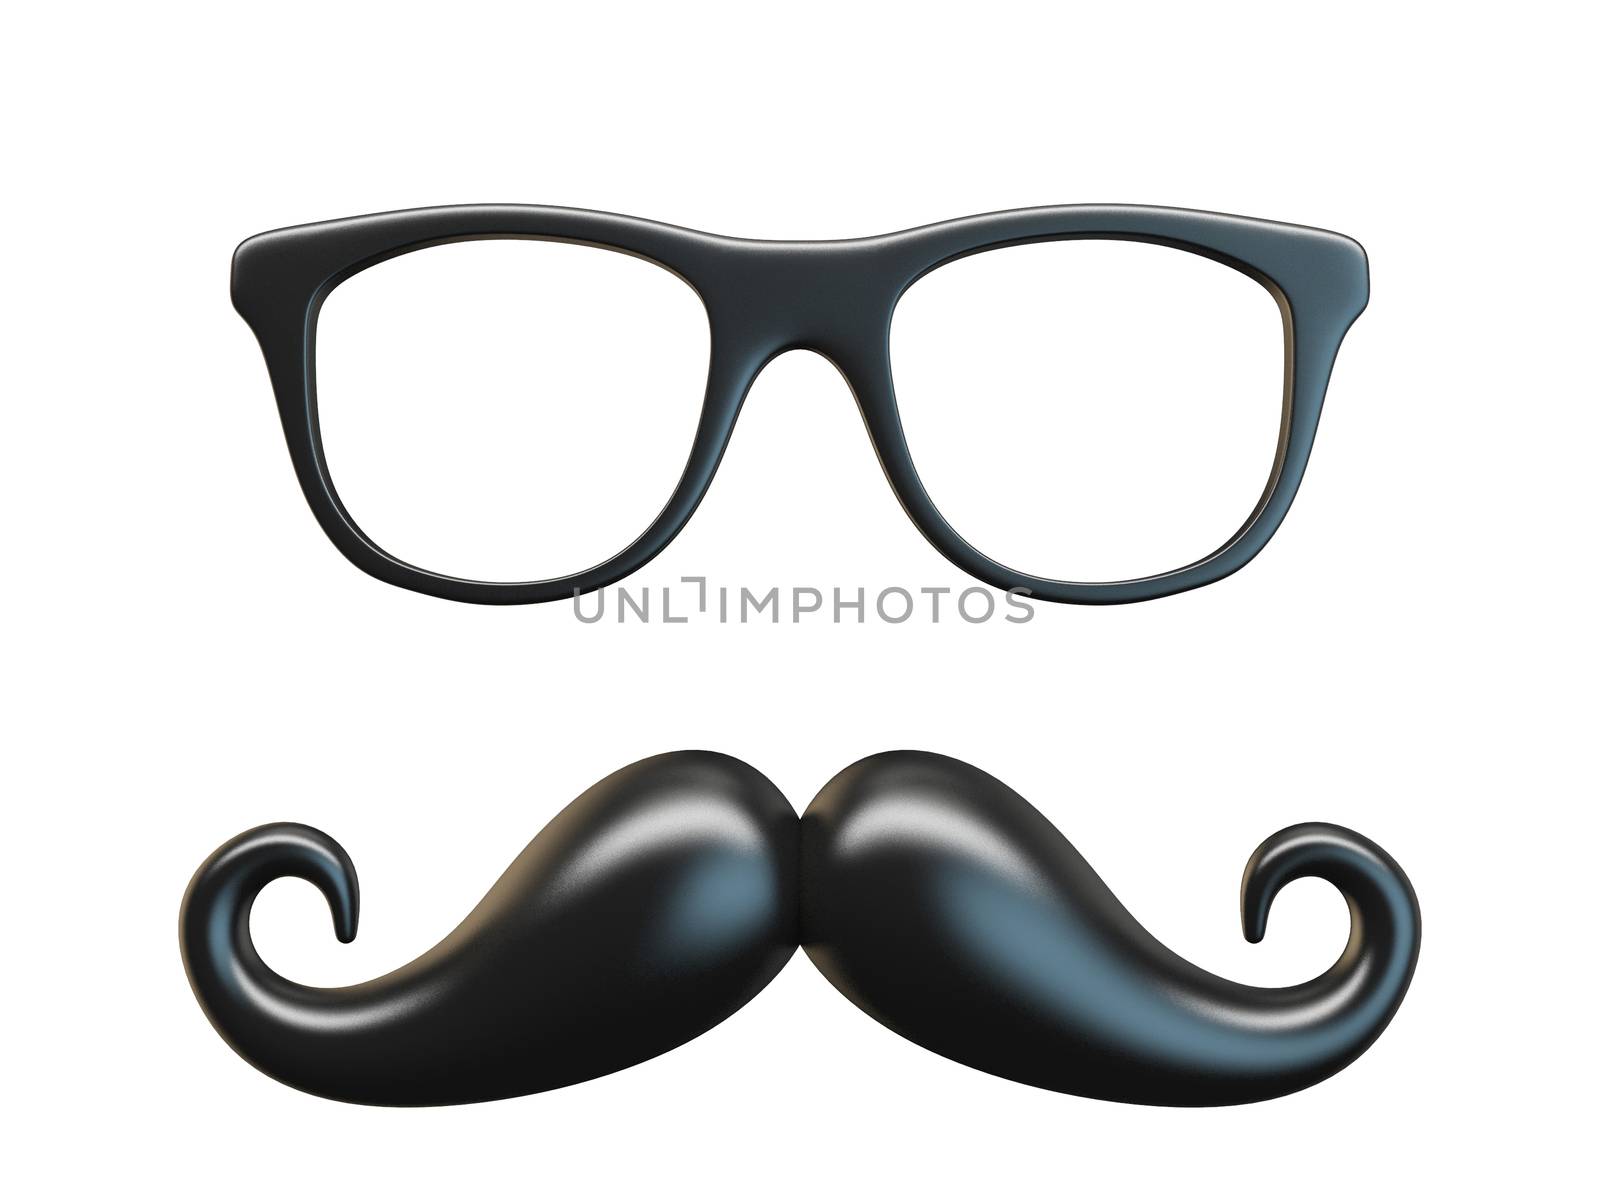 Black mustache and glasses 3D rendering by djmilic